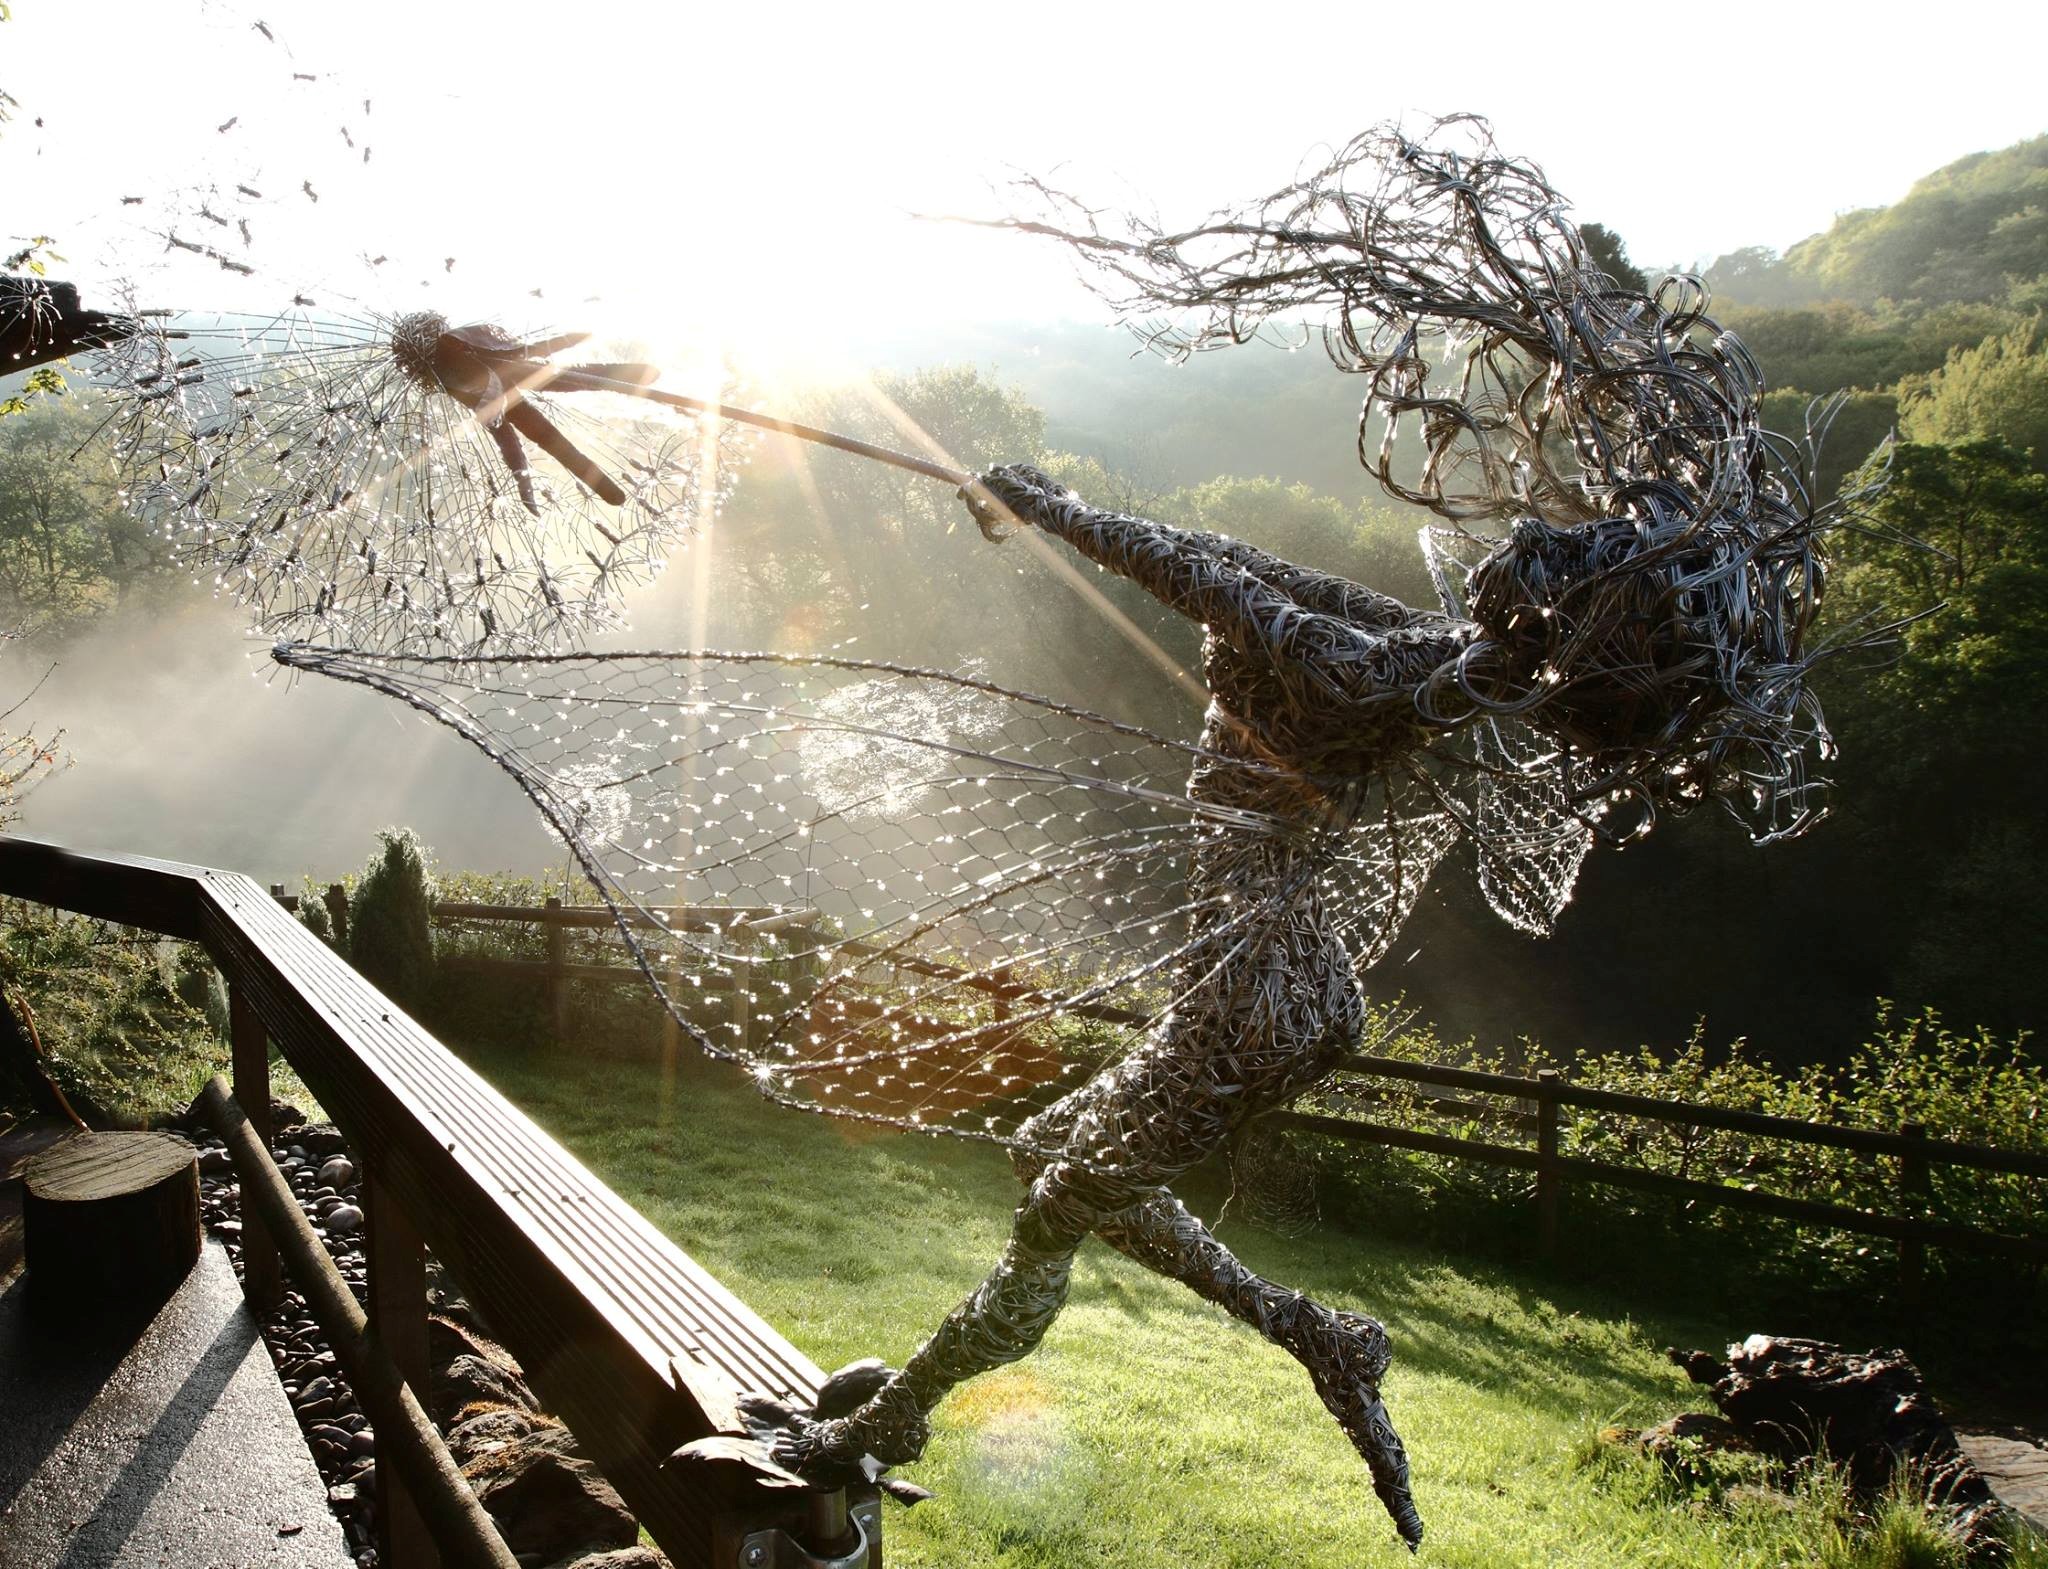 ‘1 O'clock Wish’ by Robin Wight - wire sculpture